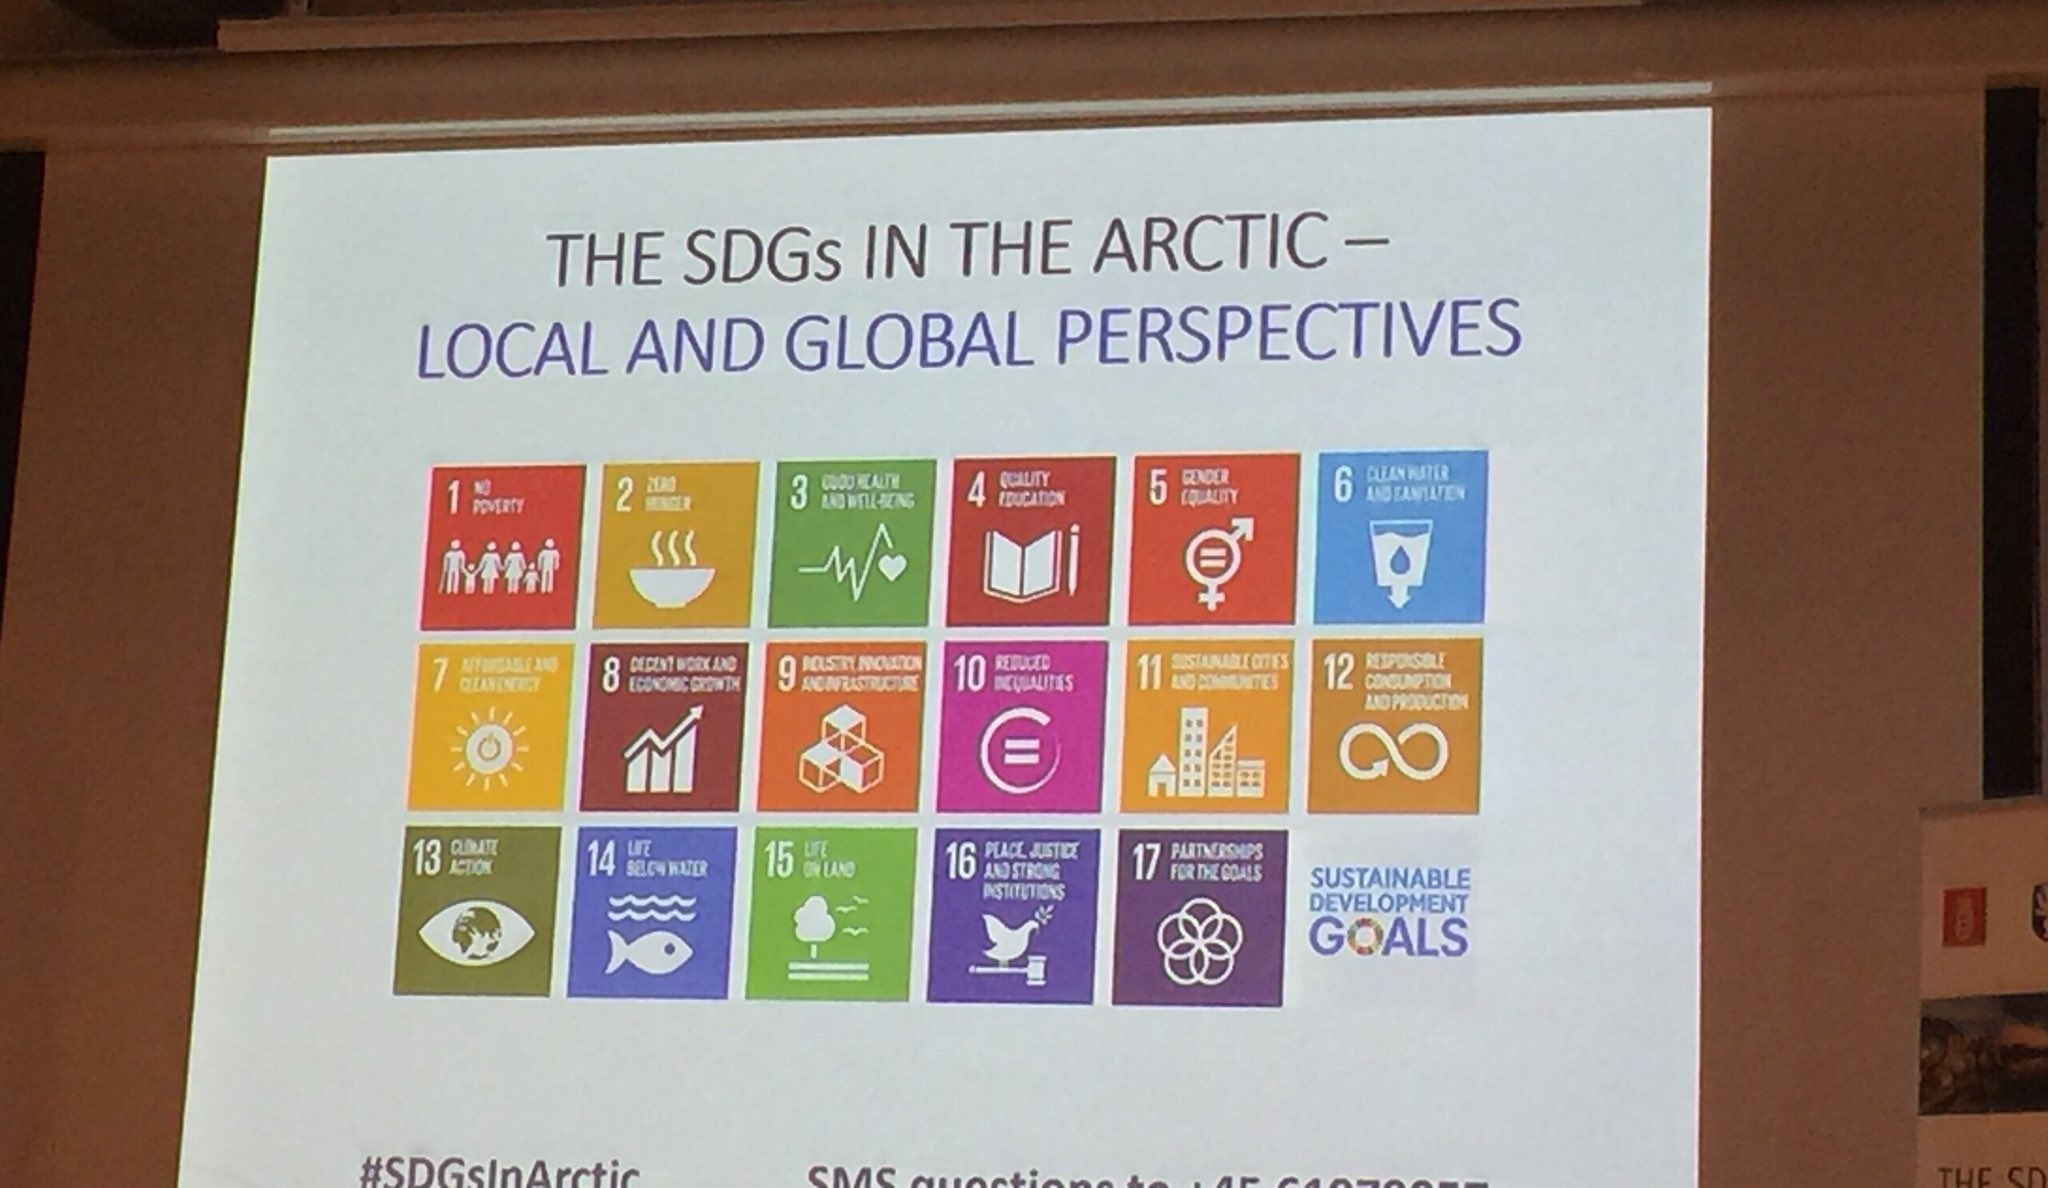 Australian Embassy, Denmark (Norway, Iceland) on Twitter: "HRH Crown Prince Fredrik opens an important conversation,a peaceful & sustainable Arctic critical 4 the🌏#SDGsInArctic @dfat… https://t.co/5VTm3LiNas"